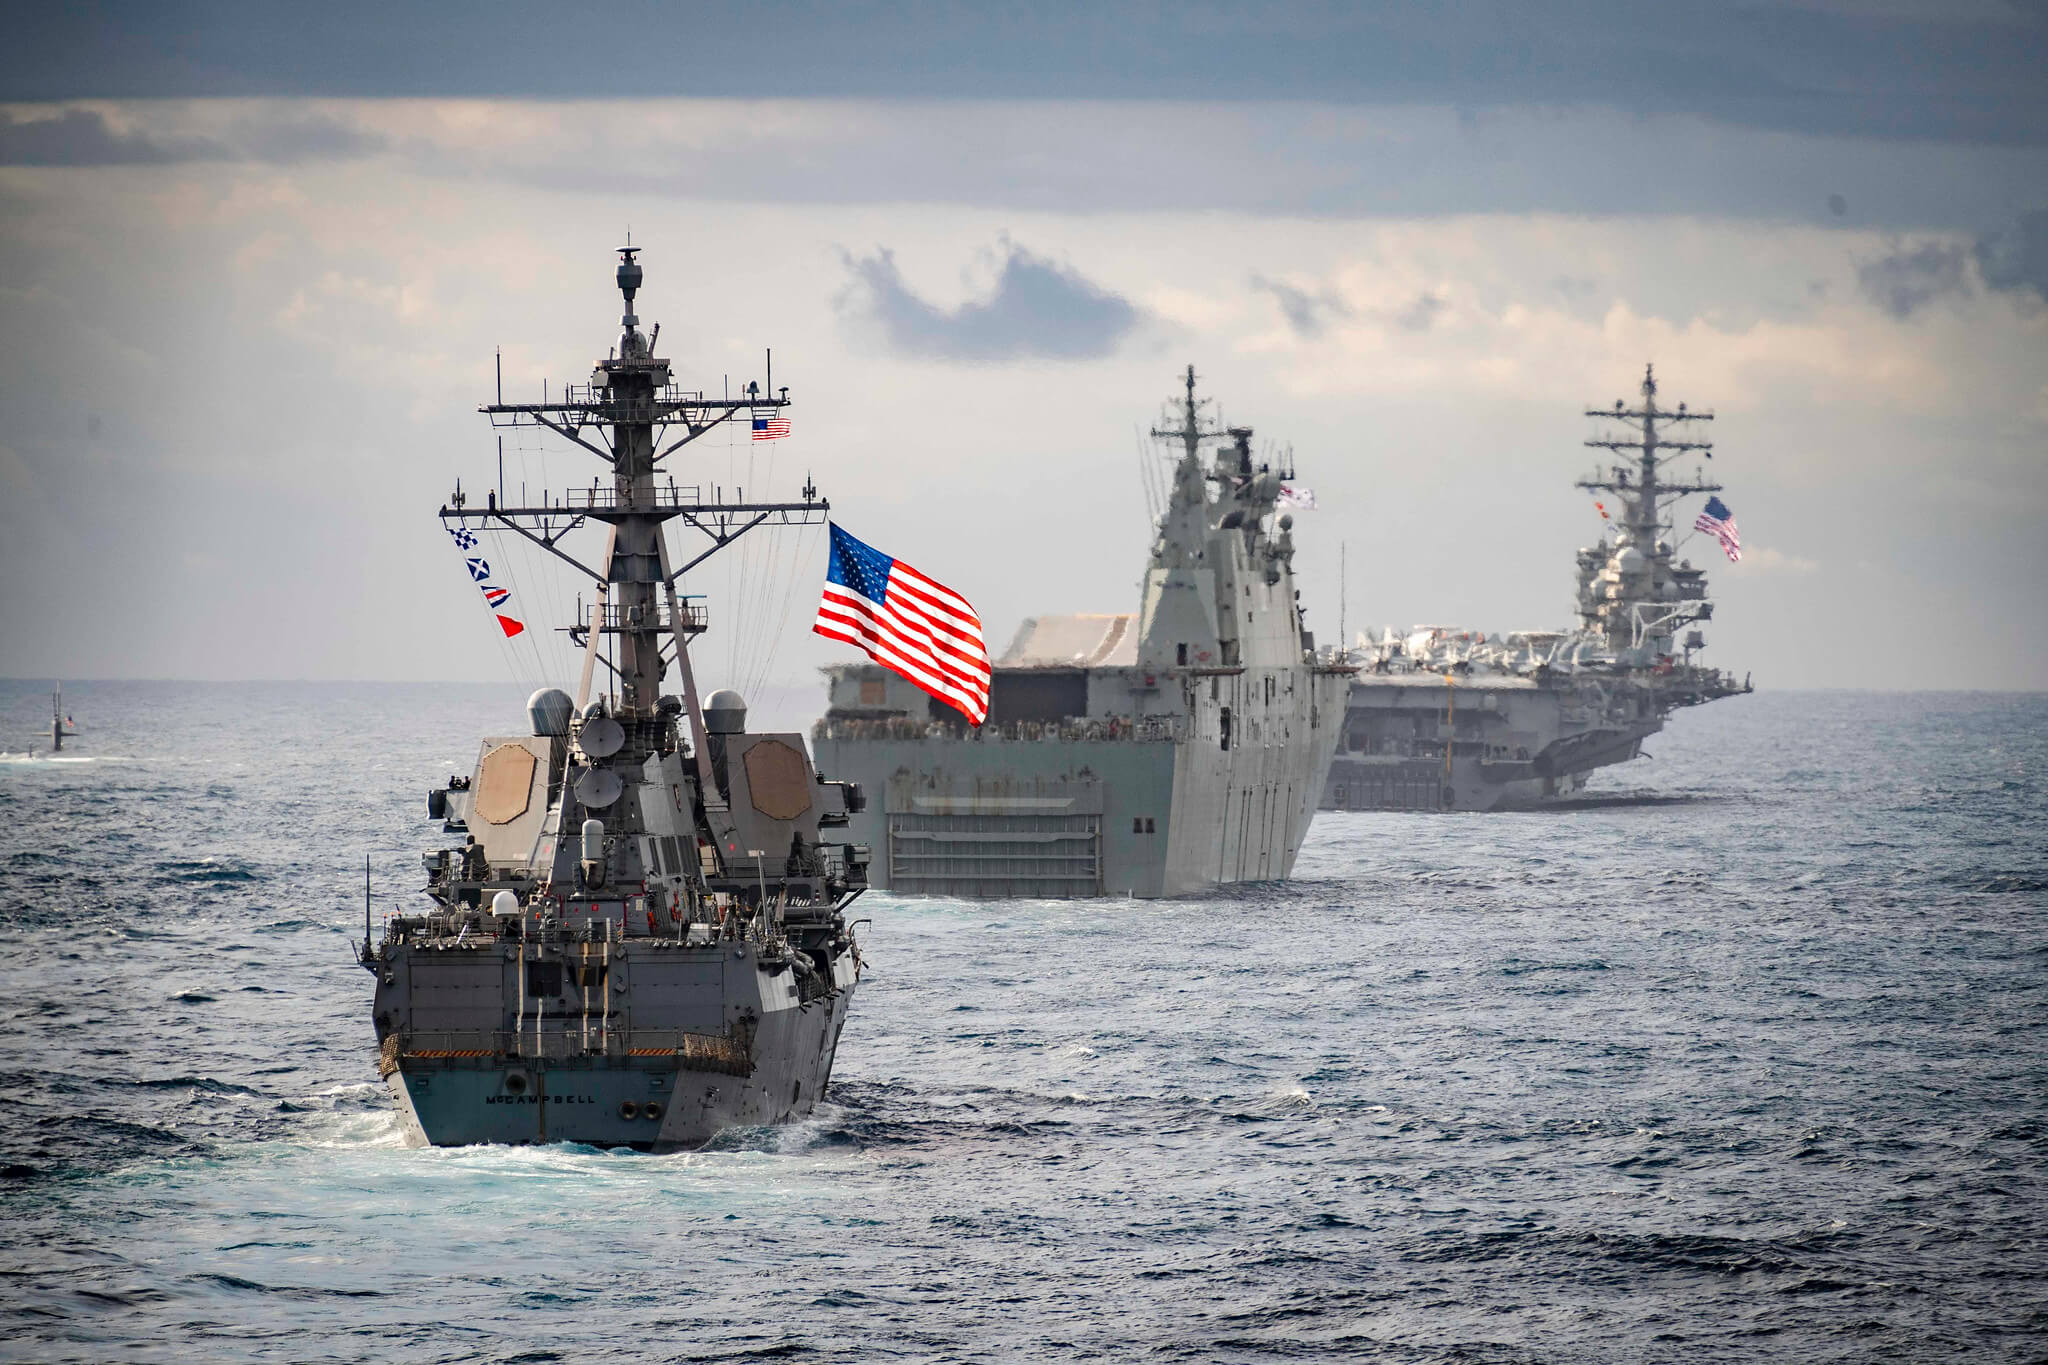 Lindley-French-The guided-missile destroyer USS McCampbell sails behind the Royal Australian Navy amphibious assault ship HMAS Canberra and the aircraft carrier USS Ronald Reagan at the Coral Sea in 2019.